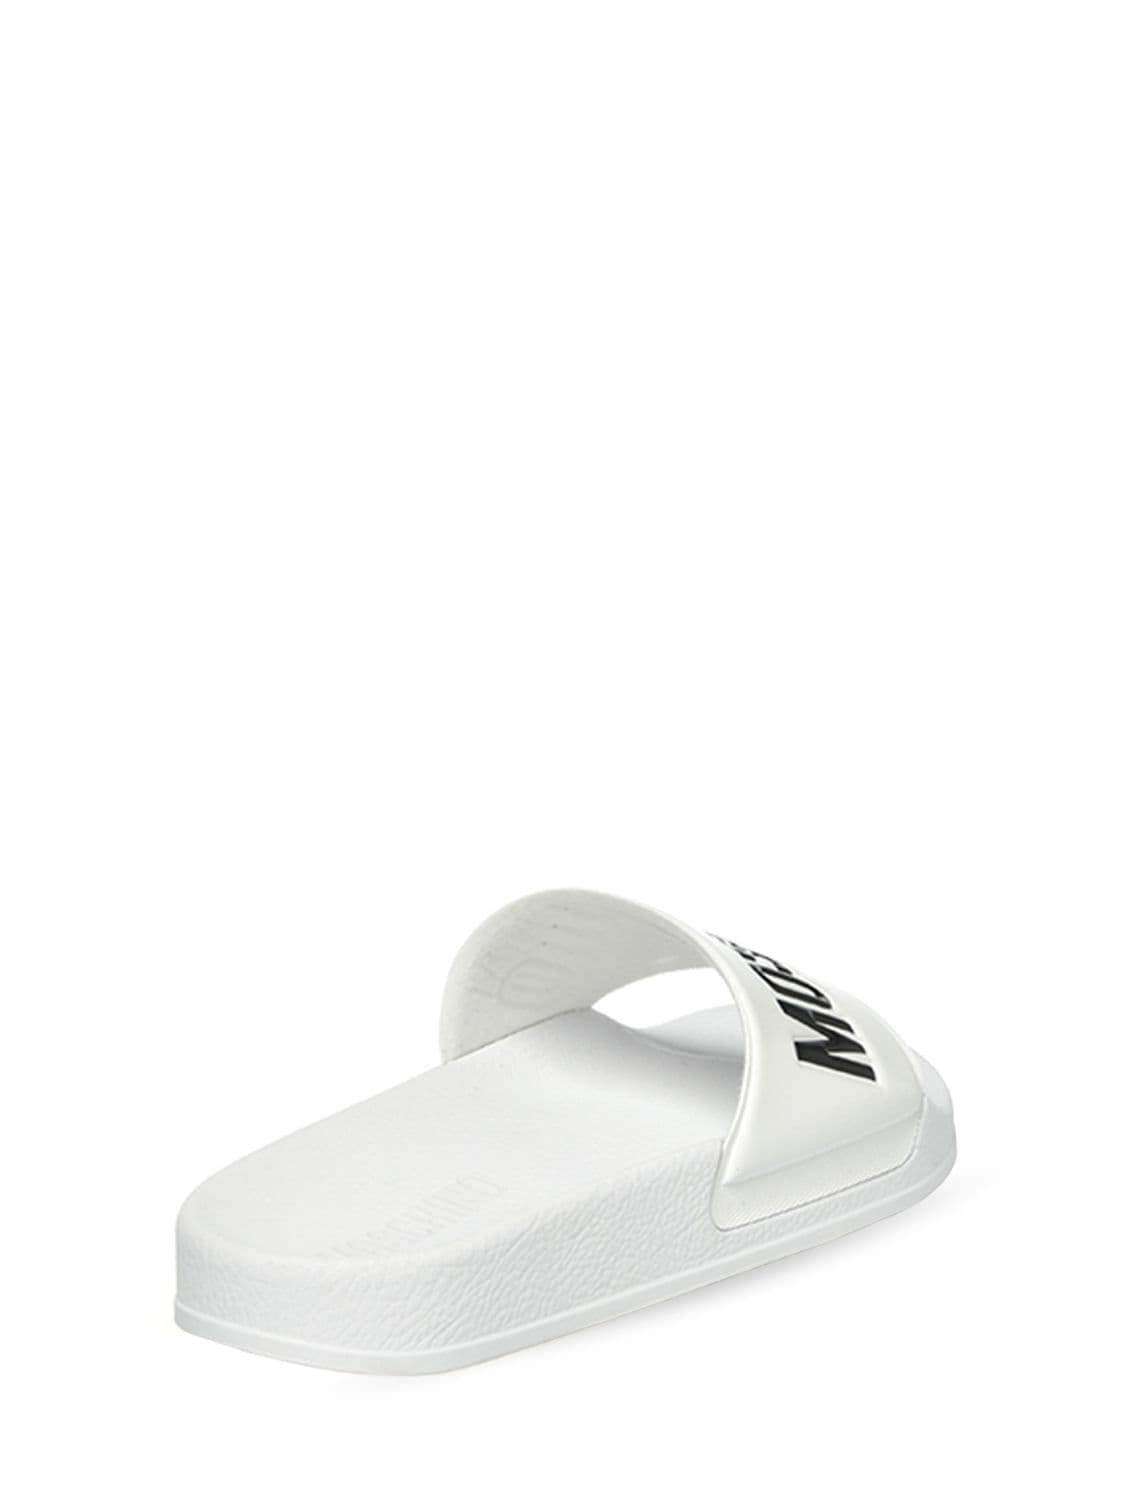 Shop Moschino 25mm Logo Pvc Pool Slide Sandals In White